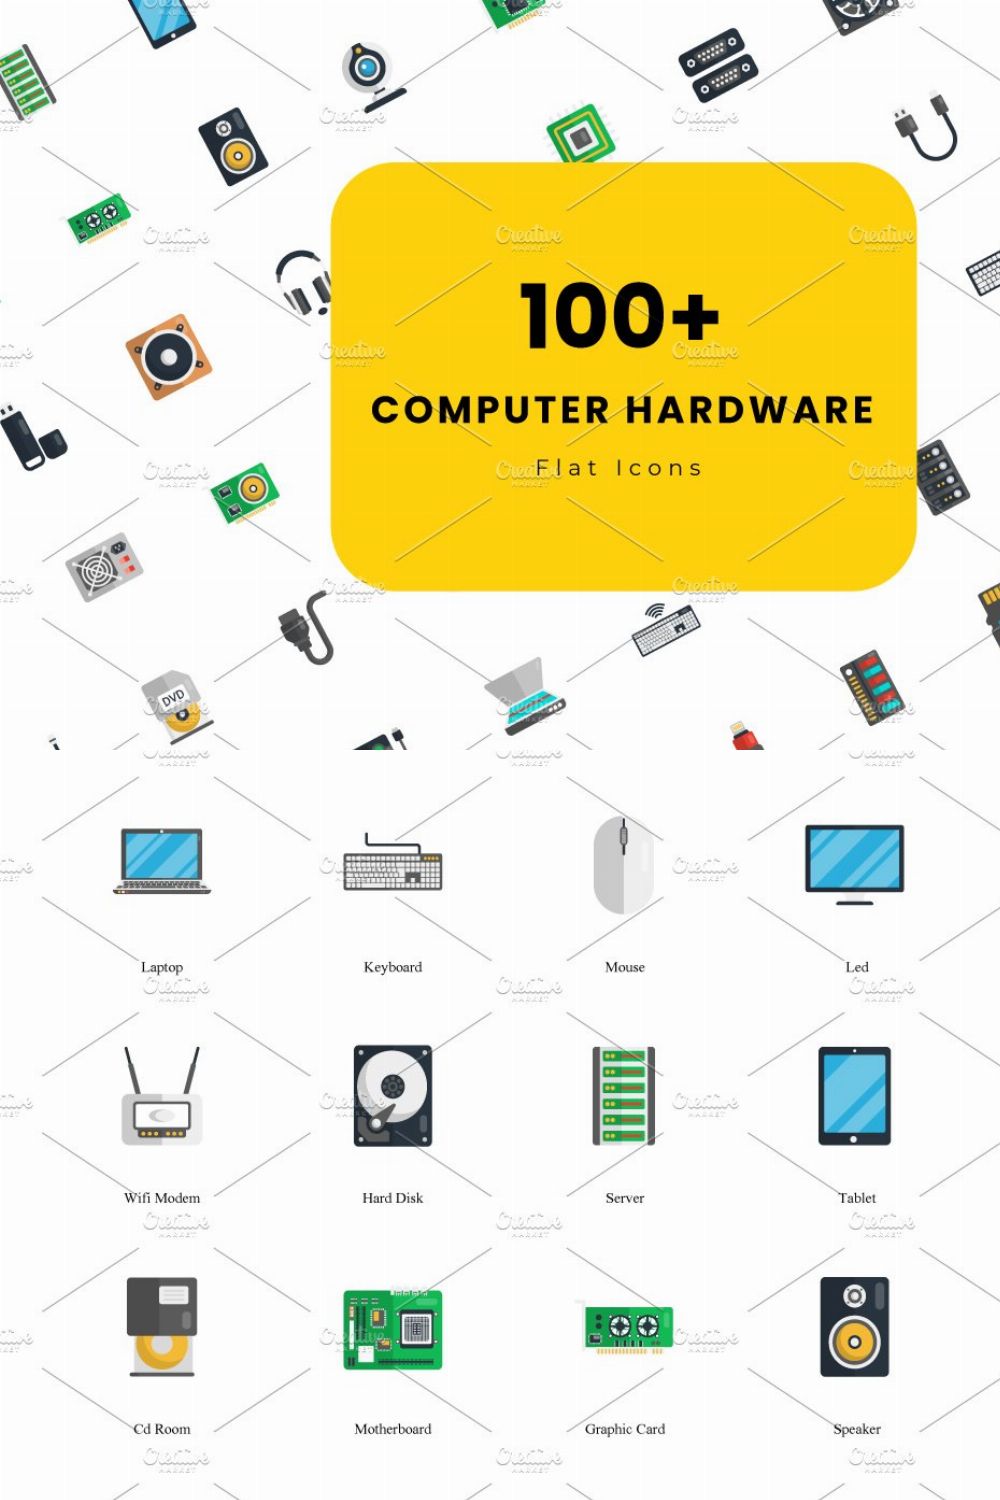 Computer Hardware Flat icons pinterest preview image.